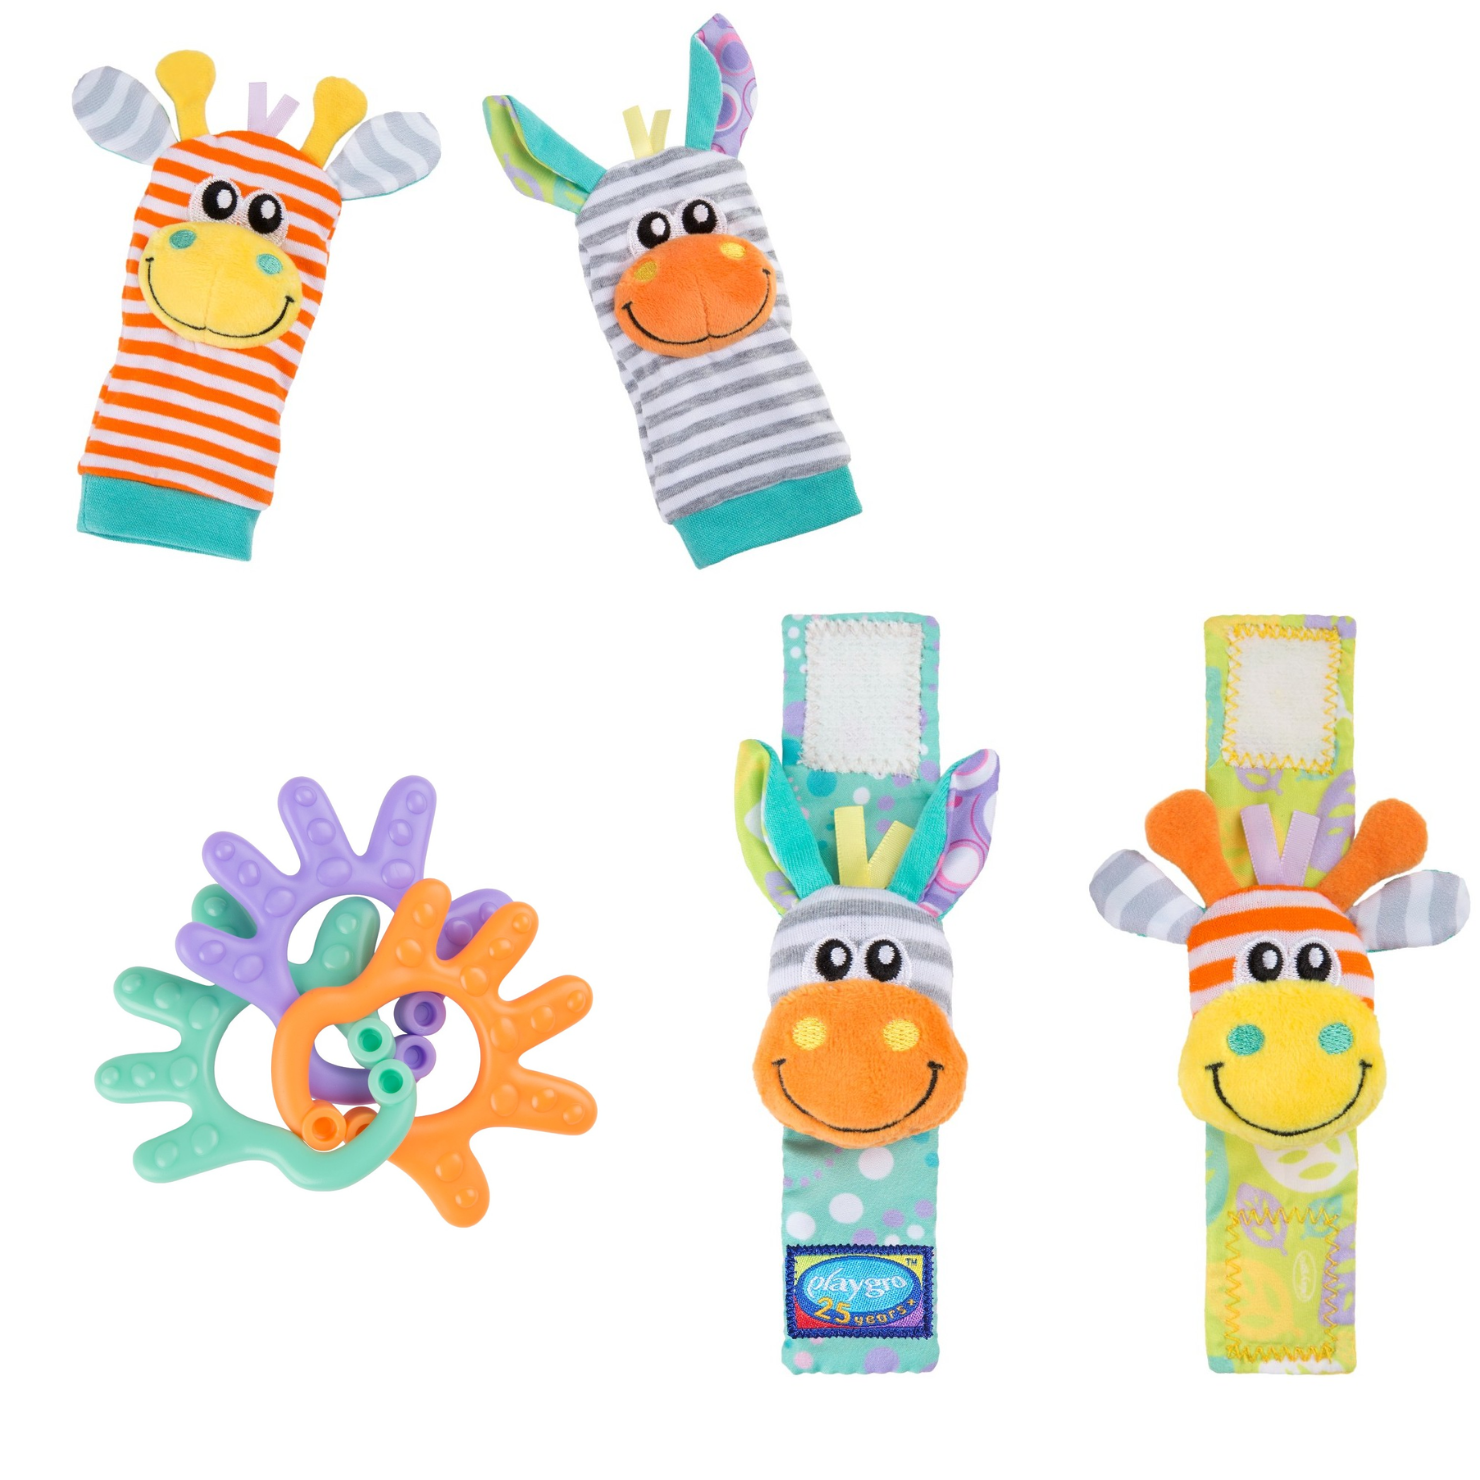 Playgro - Wrist Rattle and Foot Fingers - Jungle Friends Gift Pack (10188405) - Leker